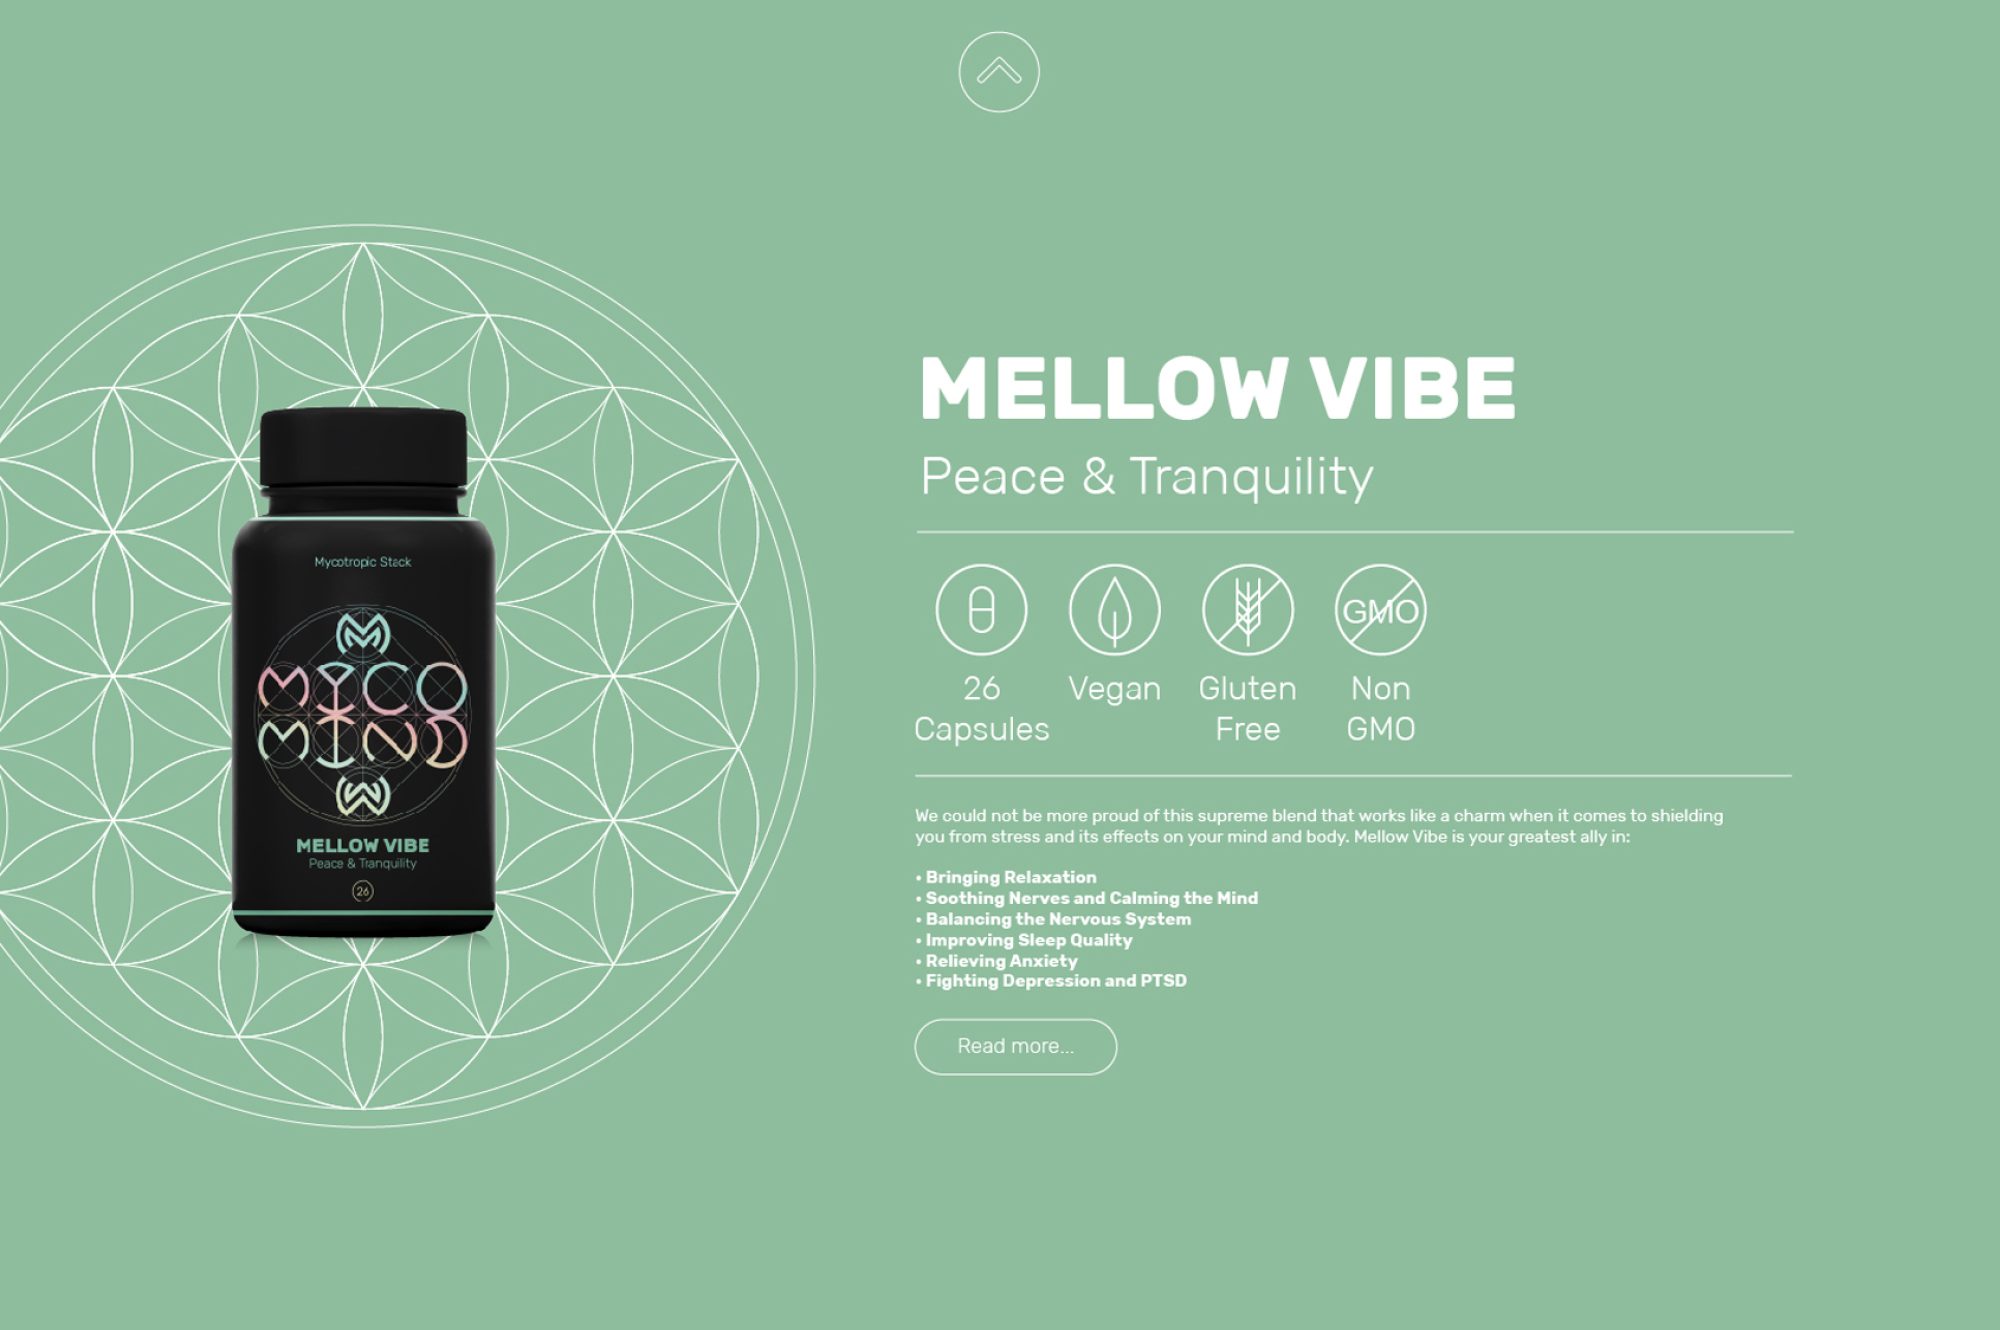 Myco Mind website PRODUCTS 01 Mellow Vibe